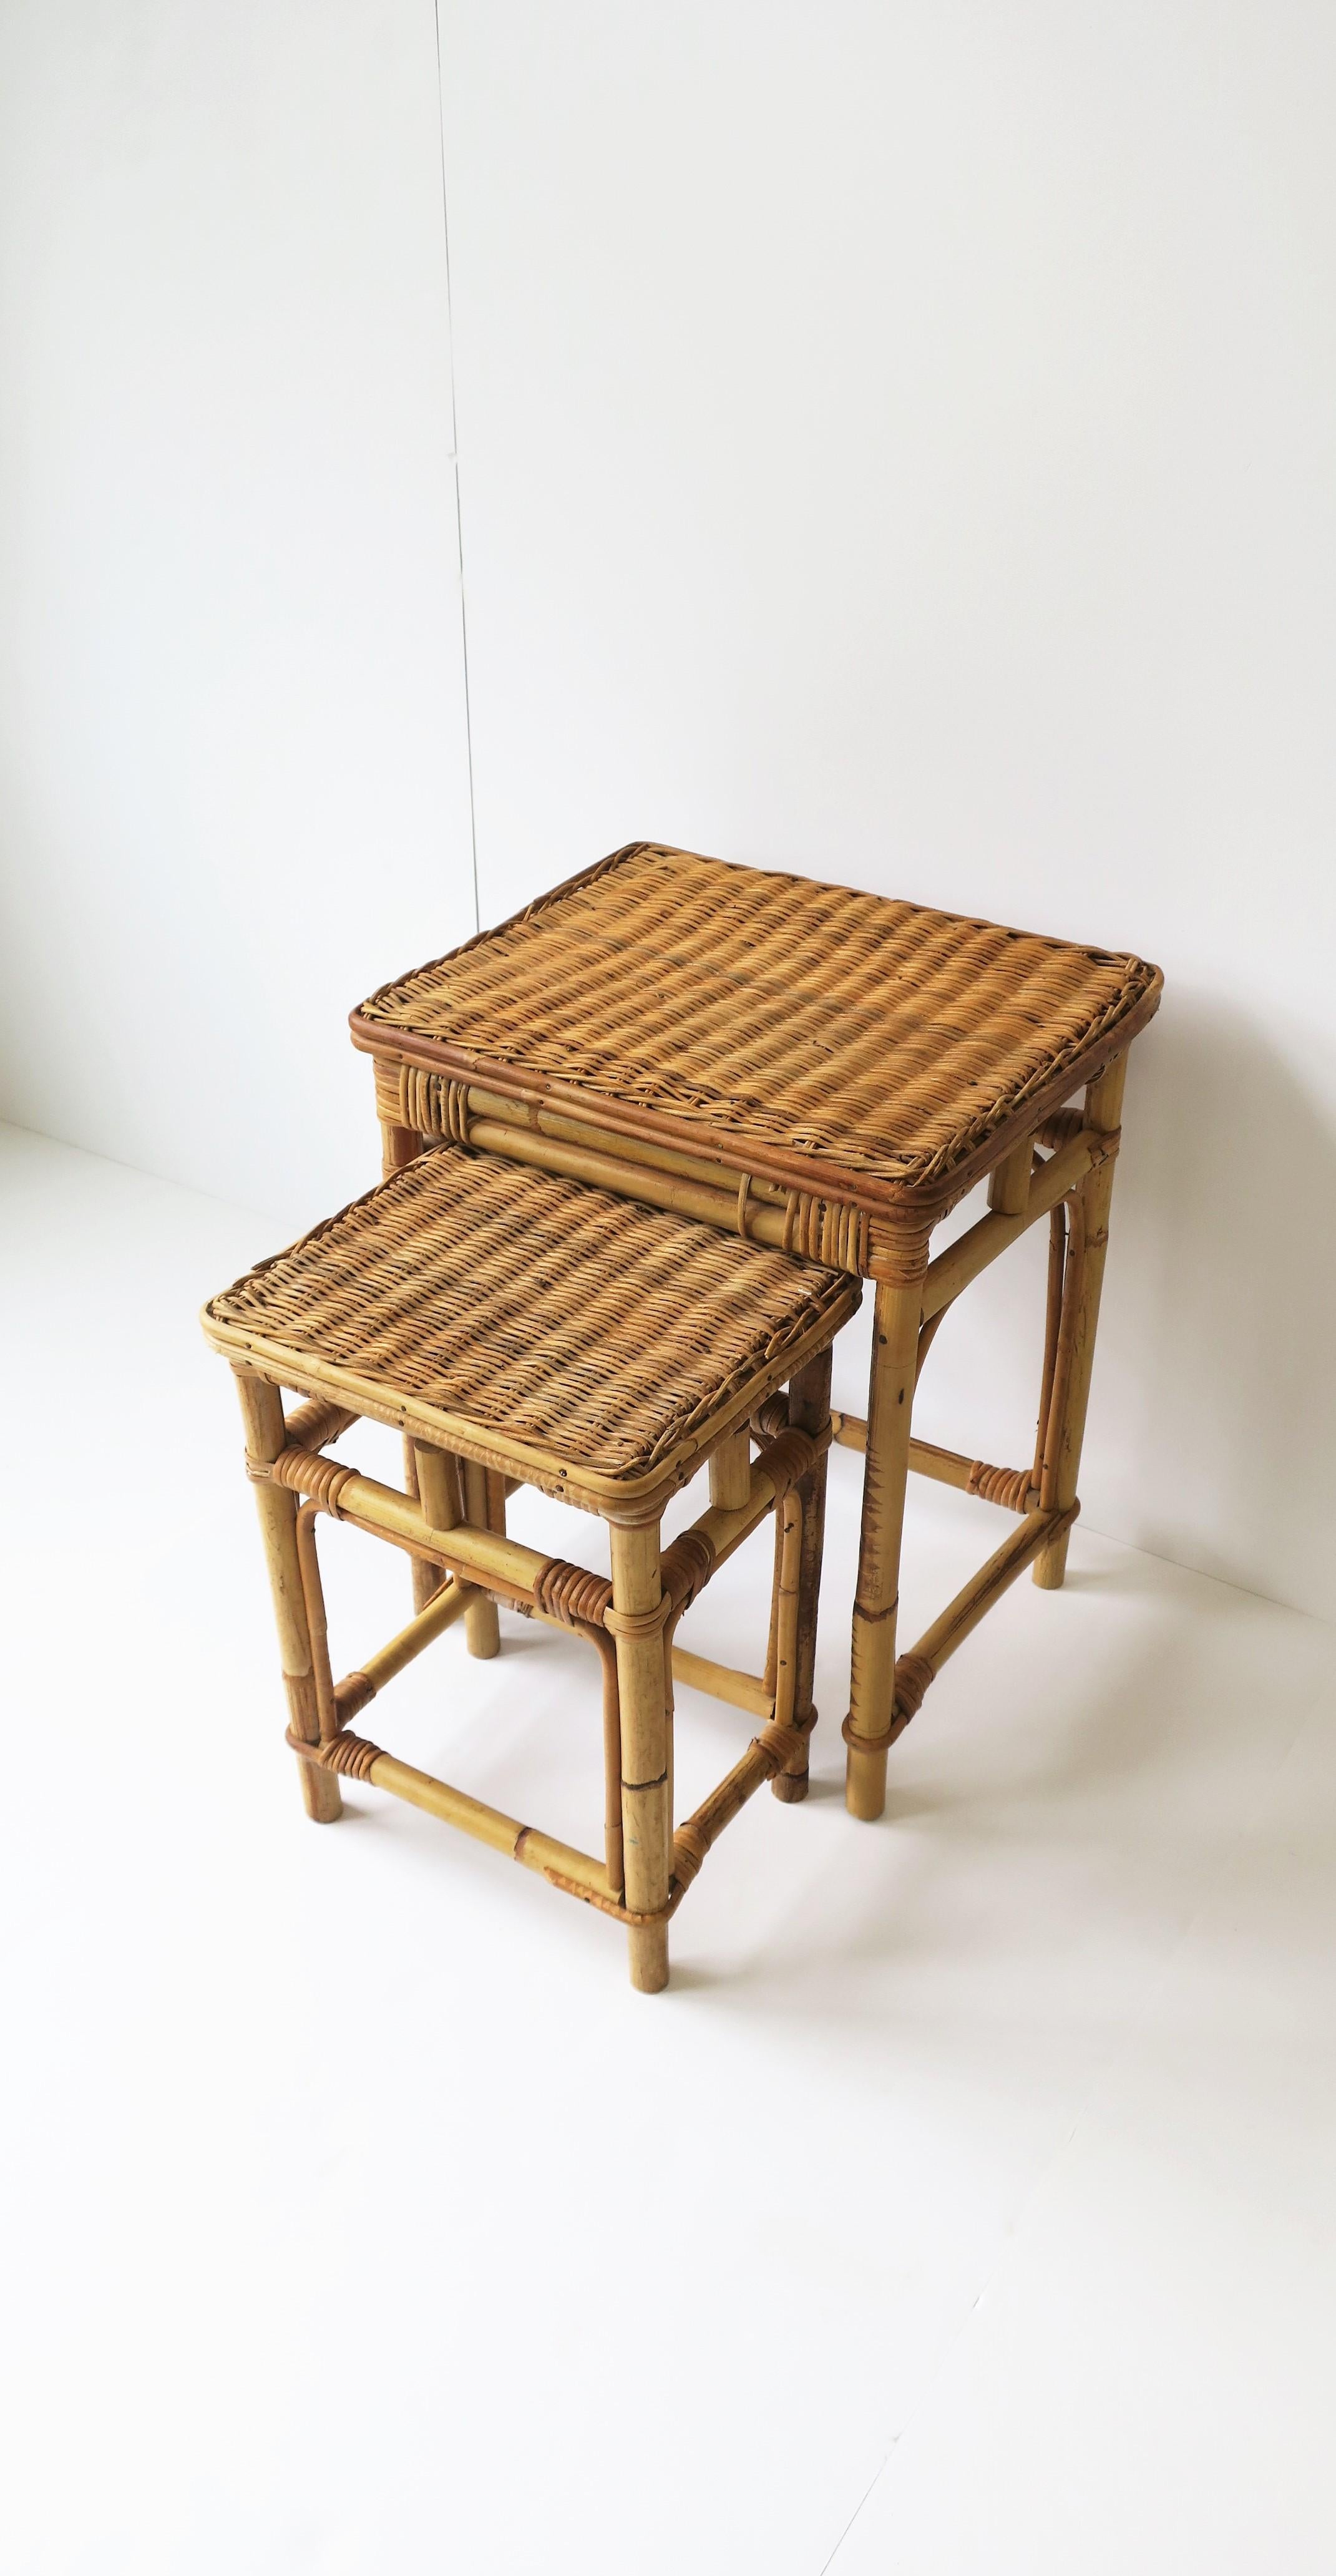 A pair/set of vintage wicker rattan nesting end or side tables, circa 1960s - 1970s. A great set, easily moved around, especially the smaller of the two; a great size at 15.63